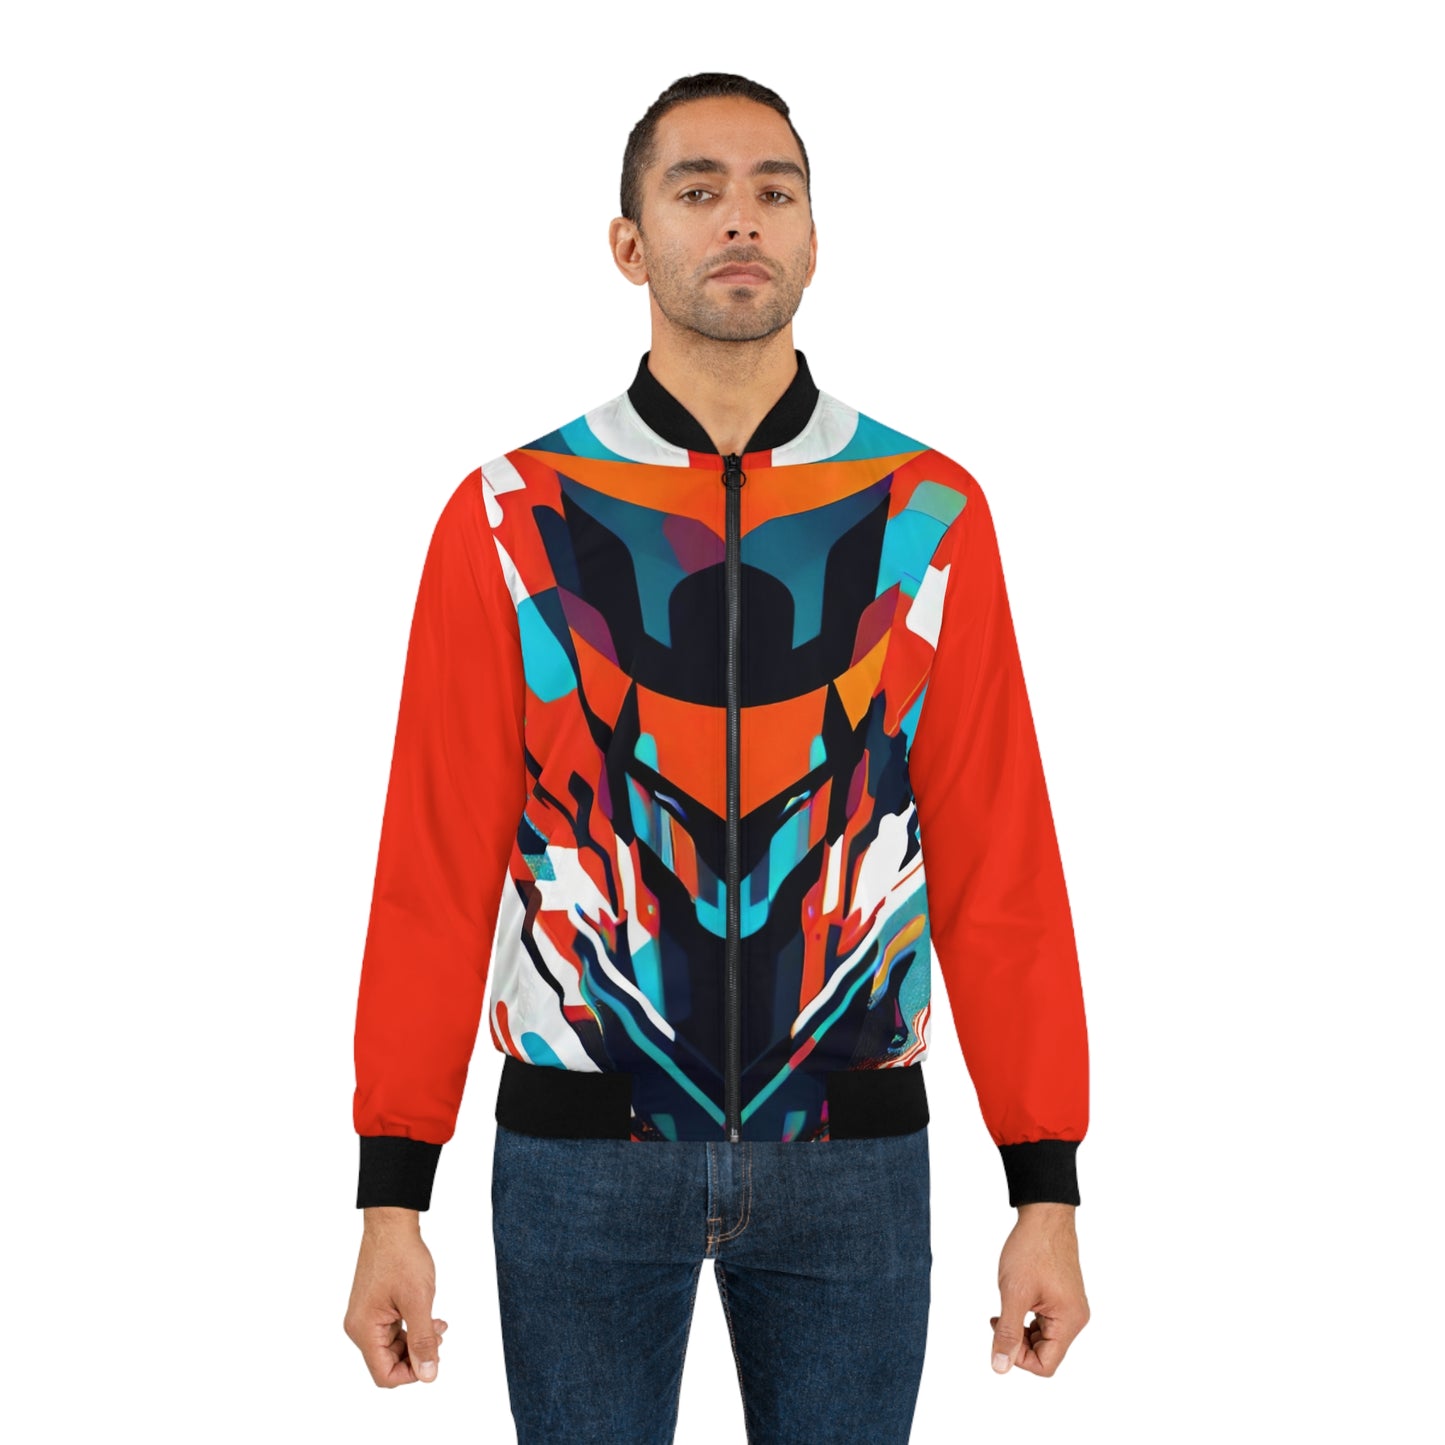 Red Cyberpunk Abstract Bomber Jacket (AOP)